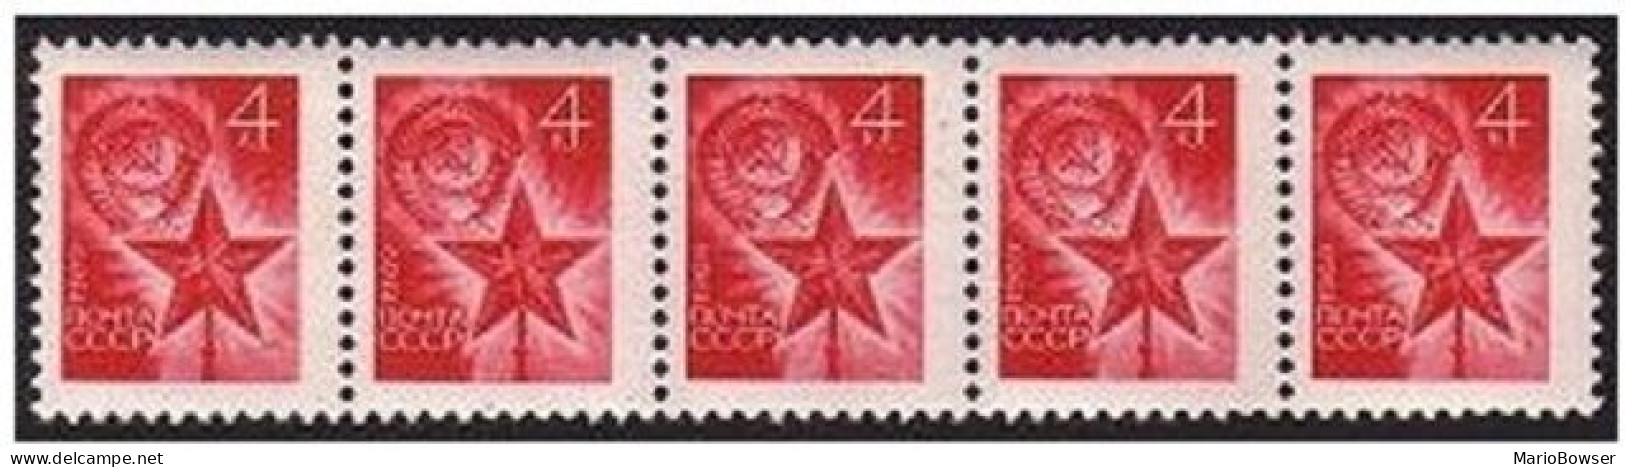 Russia 3670 Coil Strip Of 5,one With Number,MNH.Michel 3697. Arms Of USSR,Star. - Unused Stamps